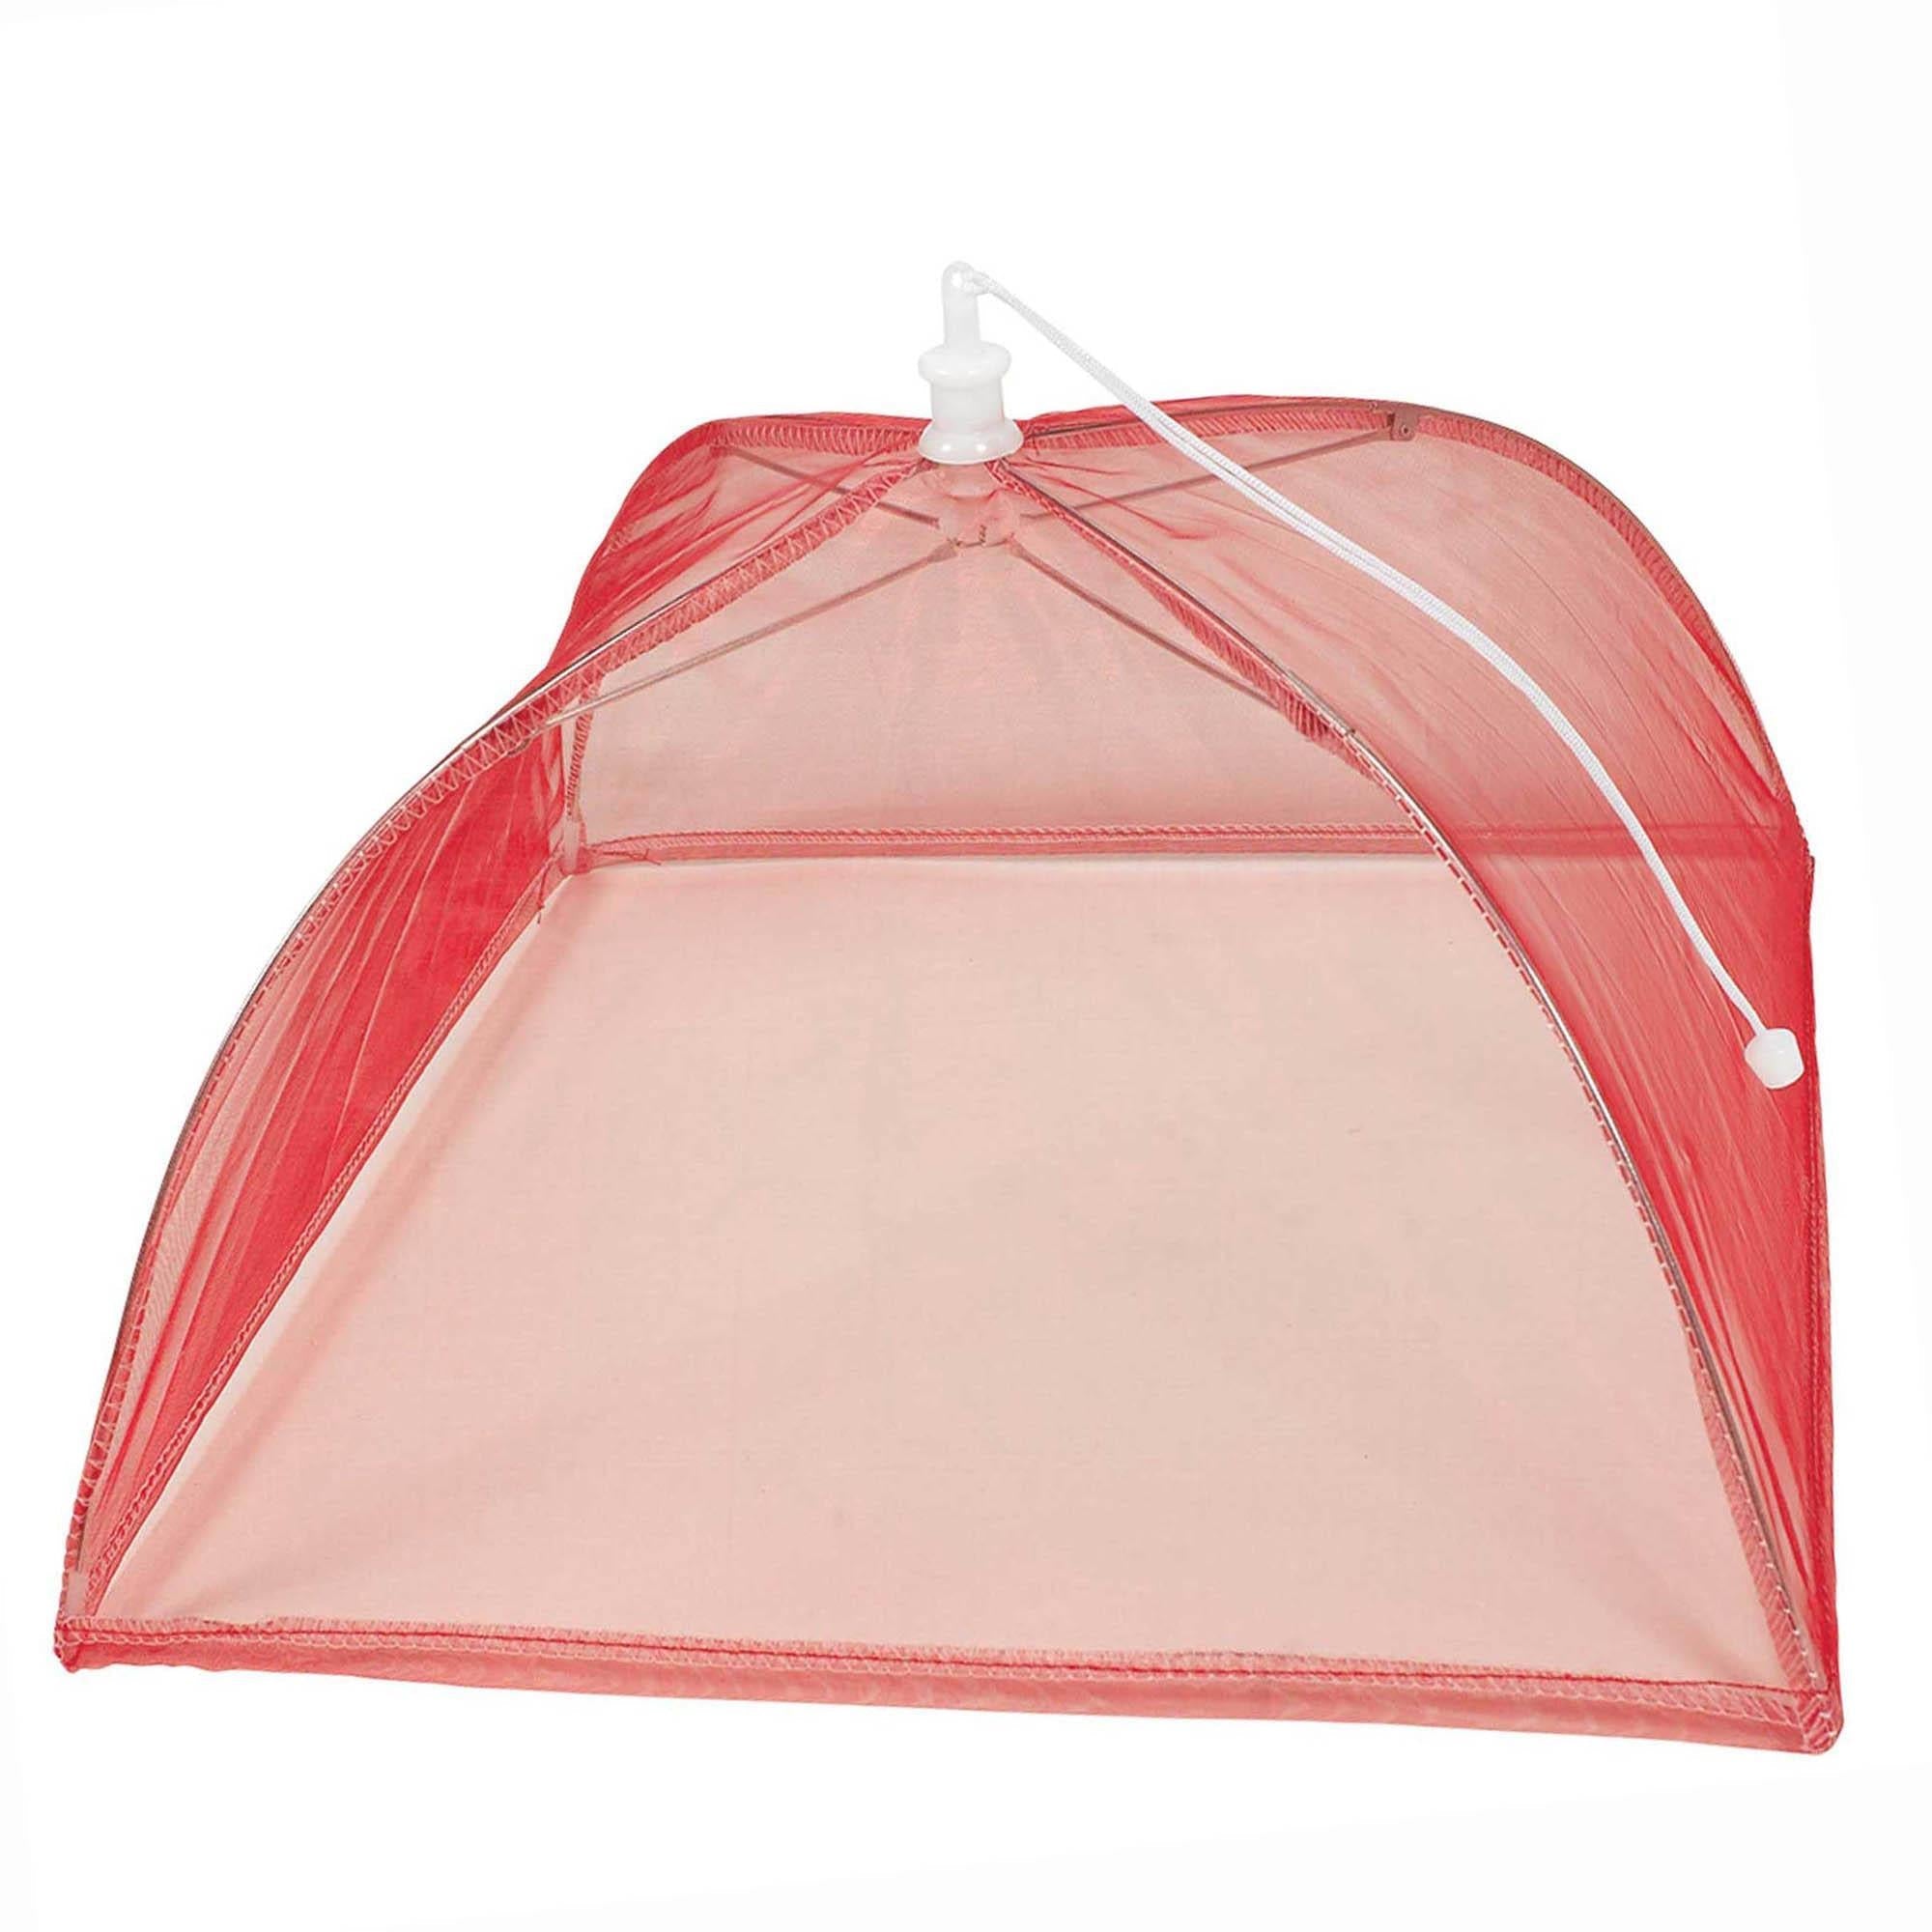 Picnic Party Mesh Food Cover 3pcs Party Accessories - Party Centre